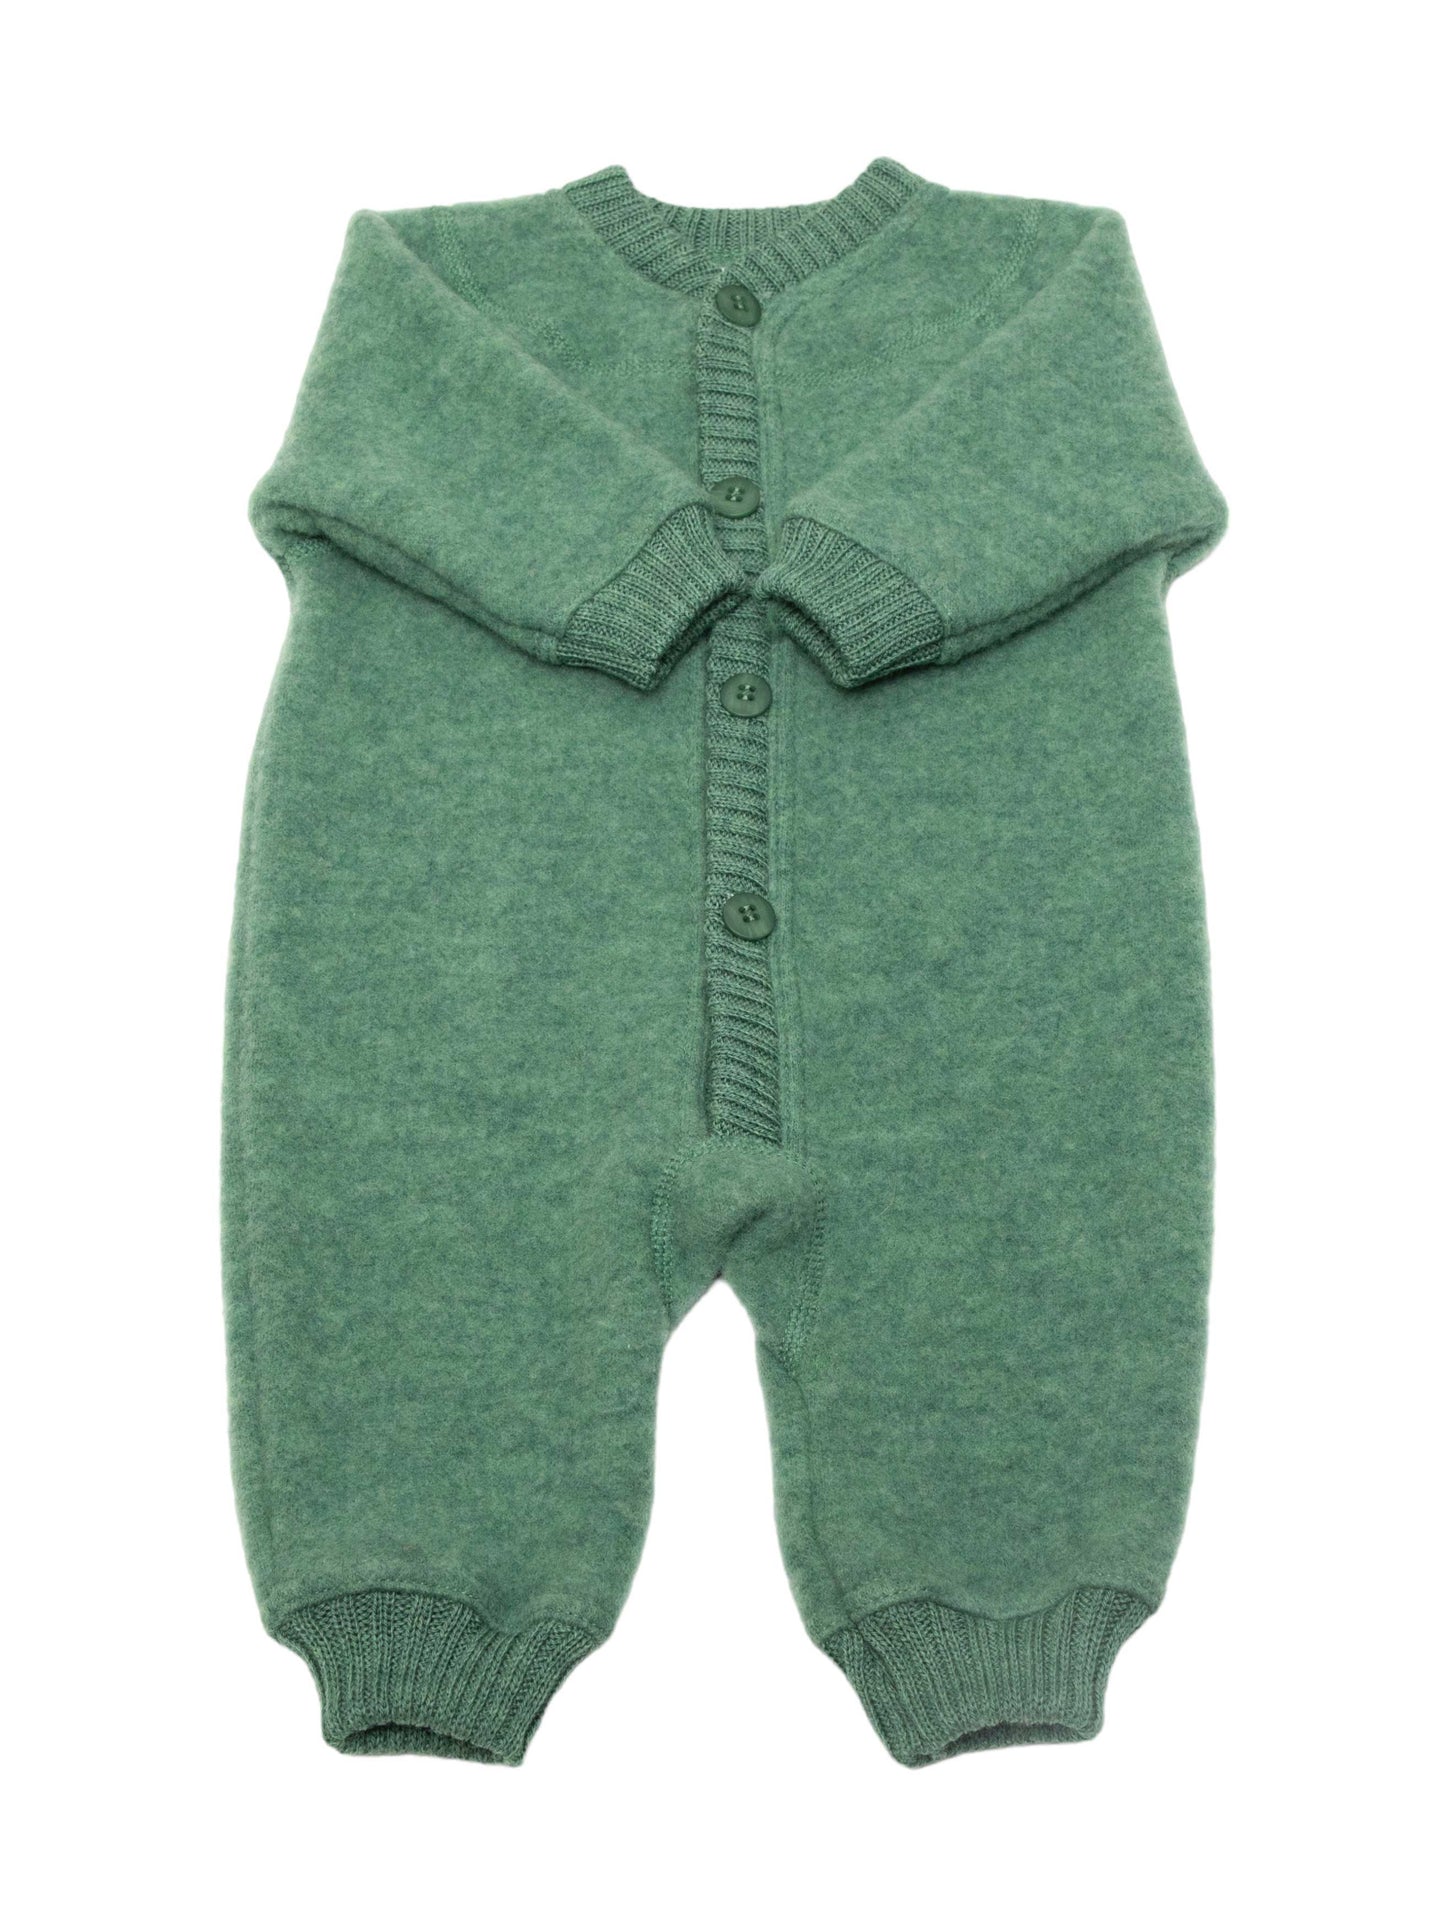 Green Baby Jumpsuit